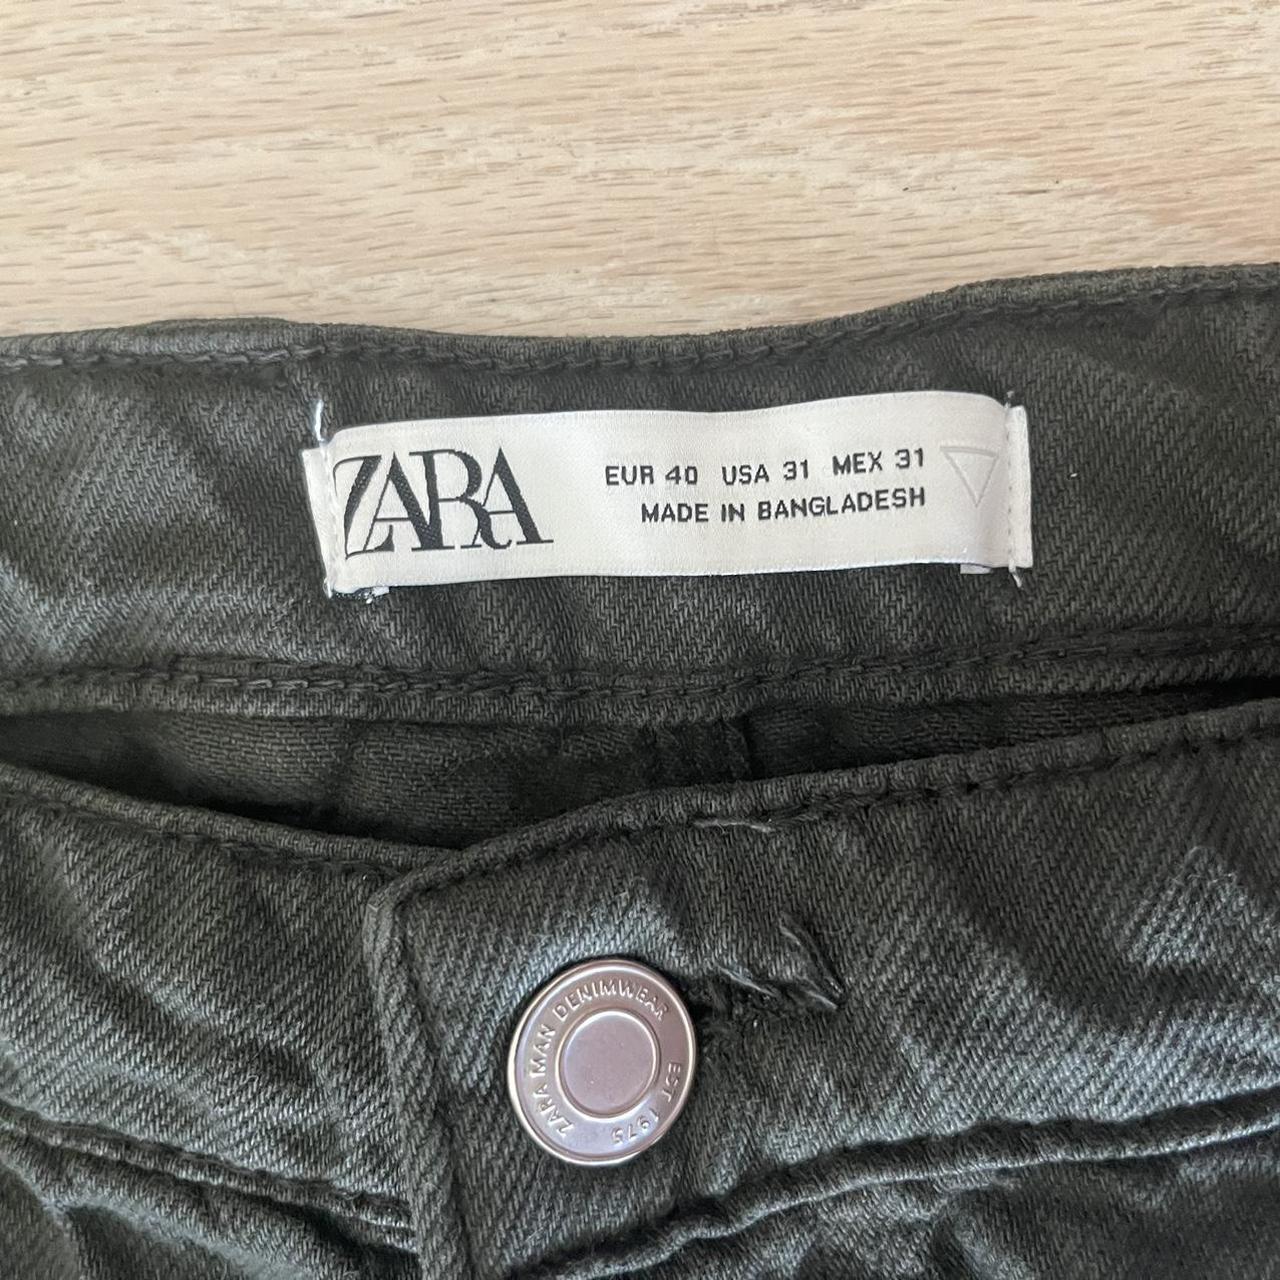 Zara cargo pants, size 31x31 and the condition is... - Depop